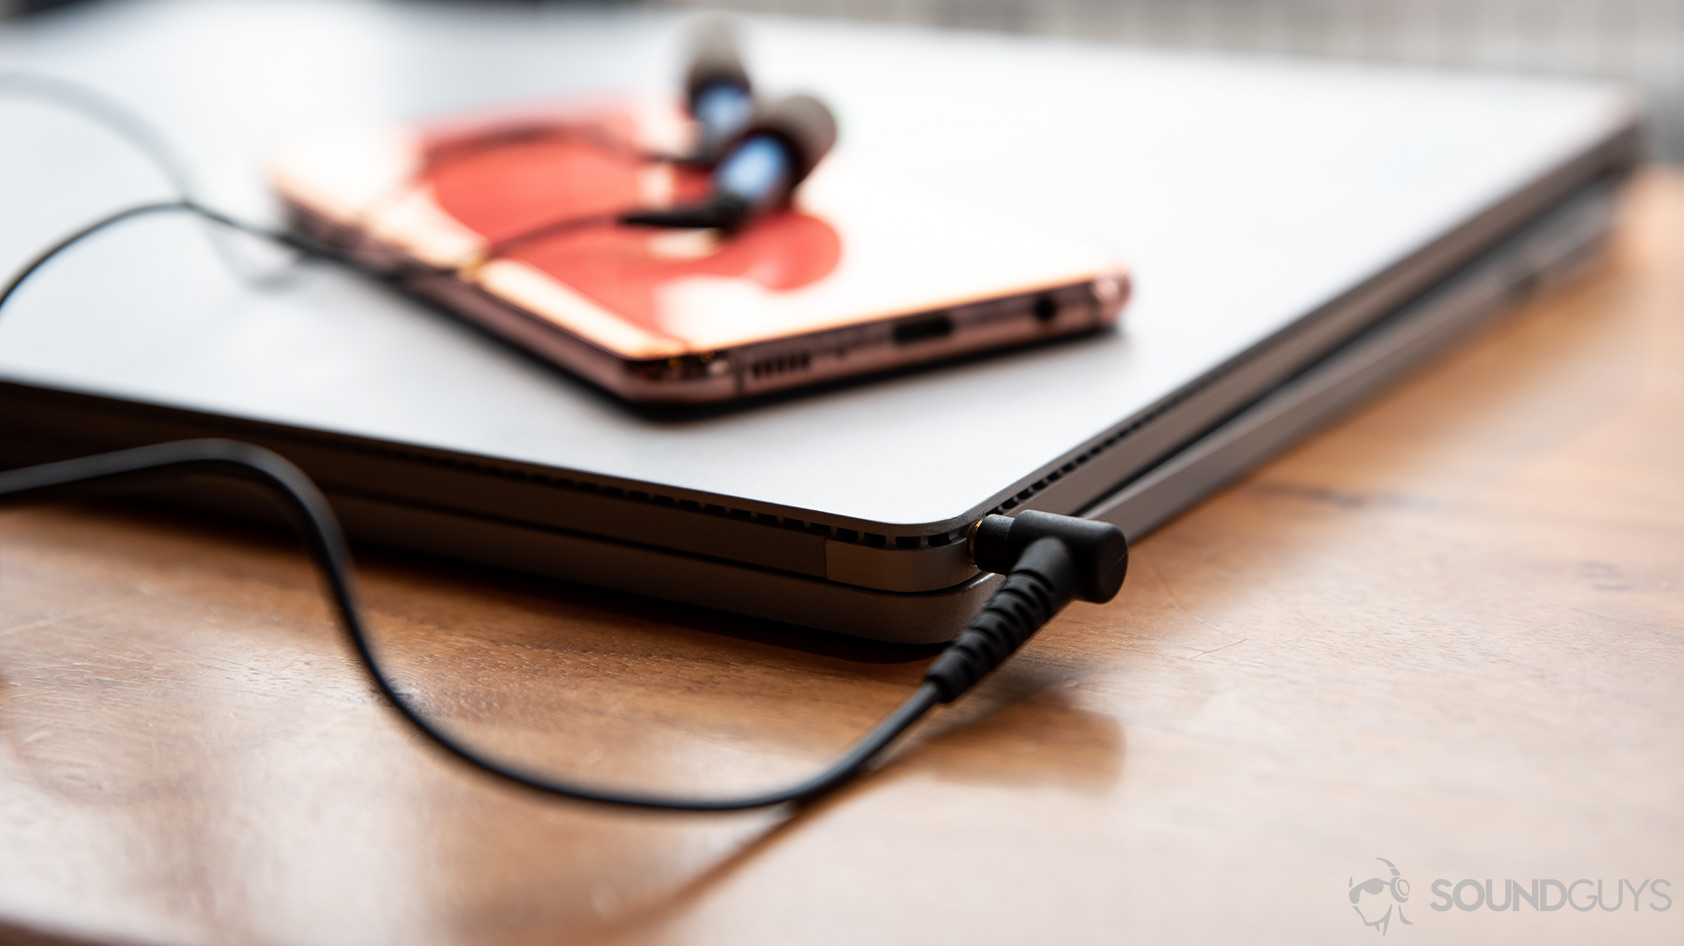 A picture of the Etymotic ER2SE wired earbuds connected to a Microsoft Surface Book laptop with a Samsung Galaxy S10e on top of it.